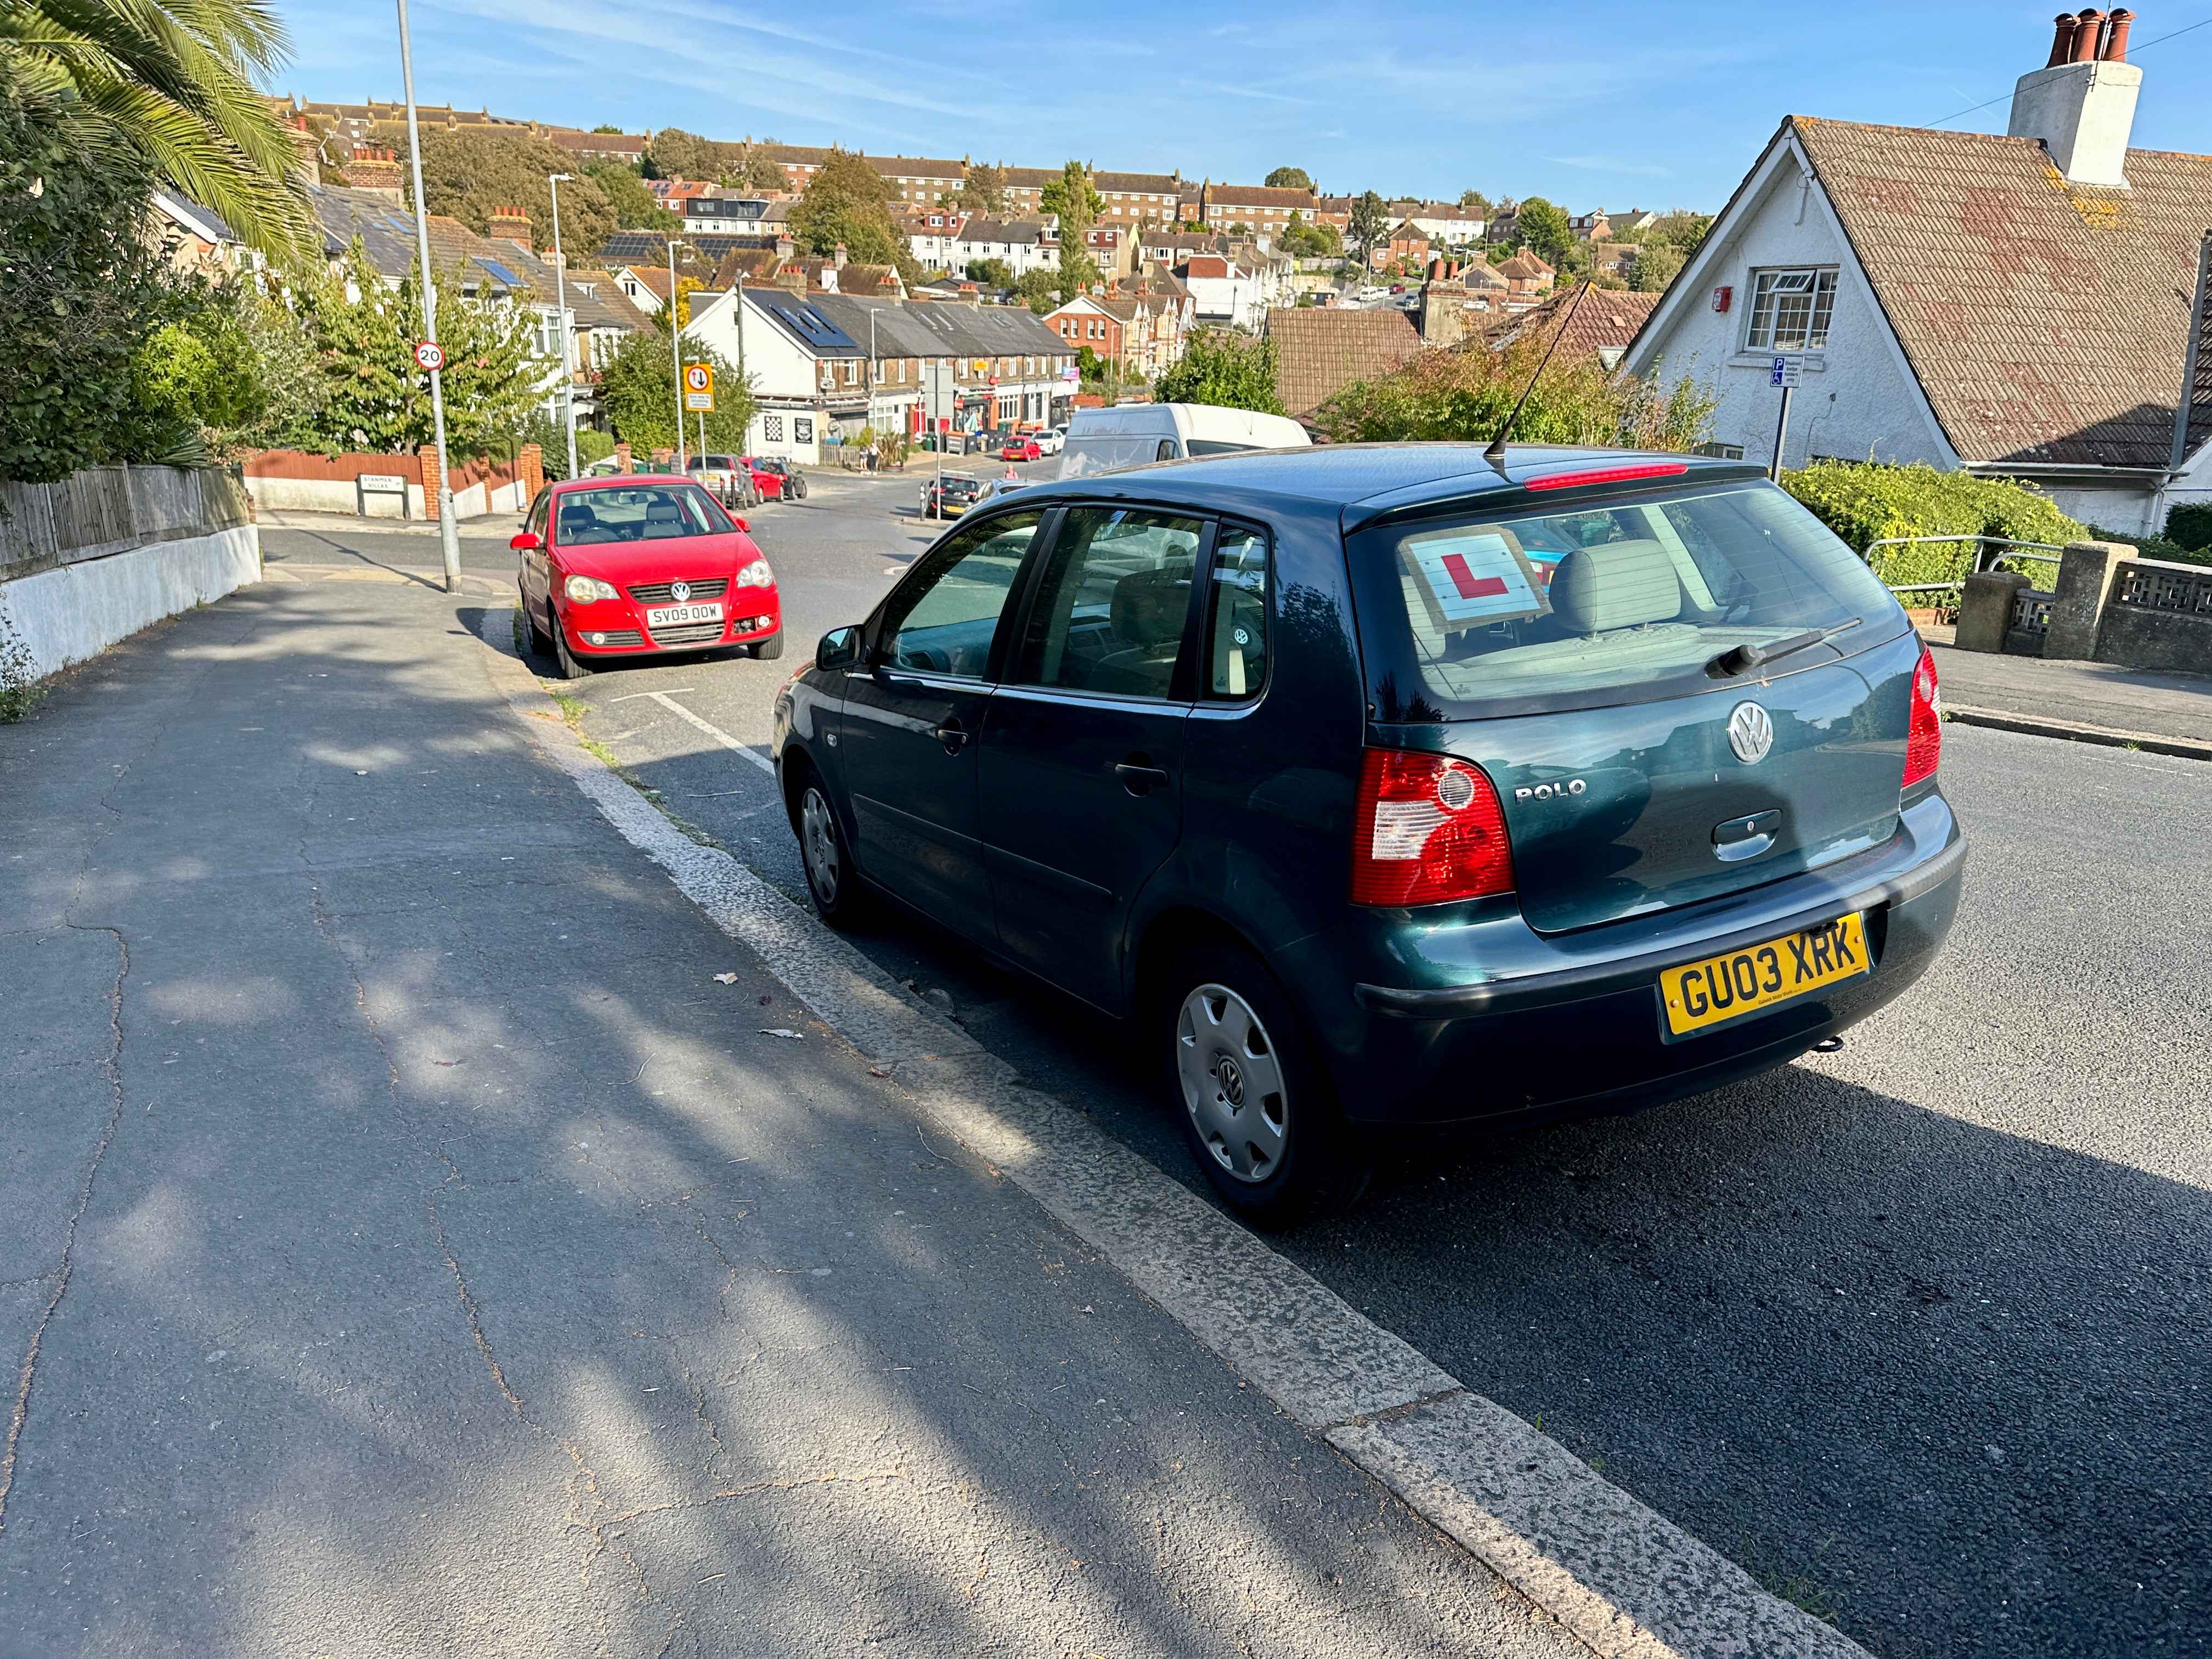 Photograph of GU03 XRK - a Green Volkswagen Polo parked in Hollingdean by a non-resident. The second of eight photographs supplied by the residents of Hollingdean.